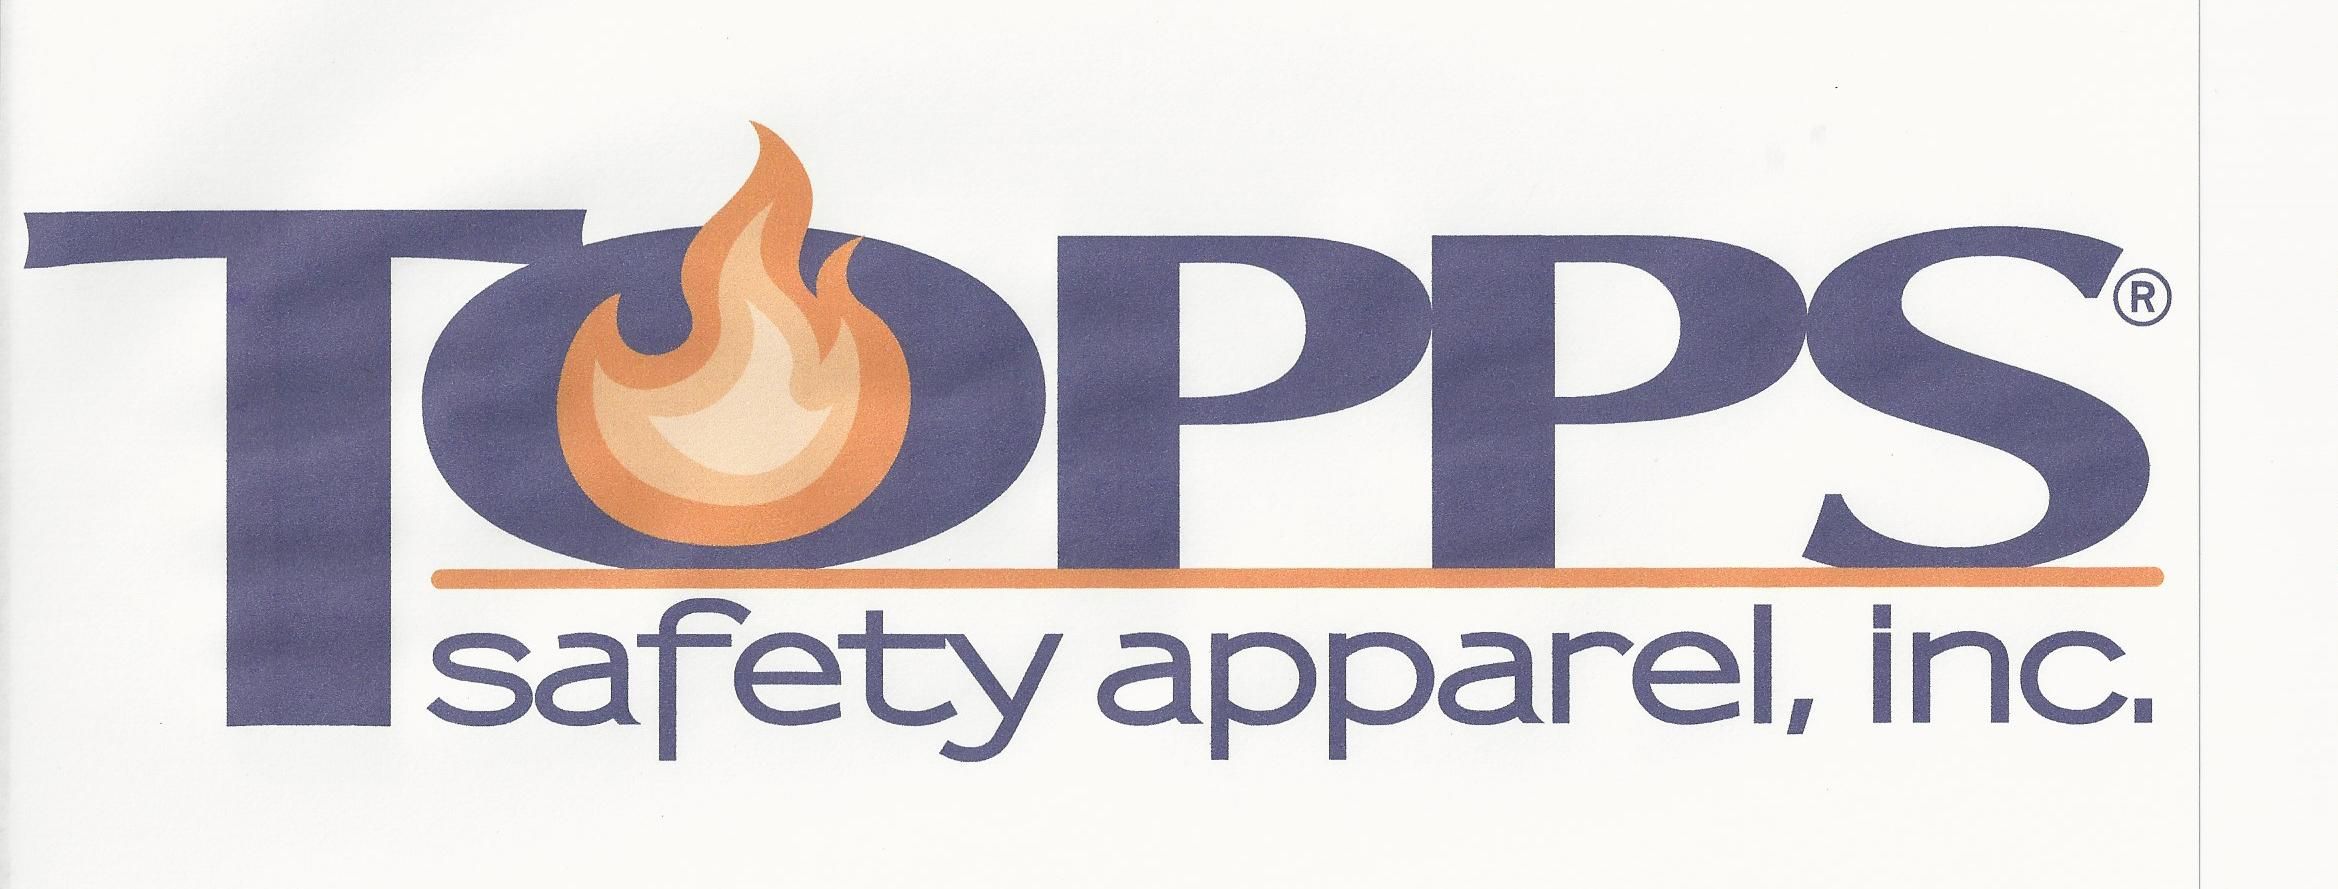 topps safety apparel inc.